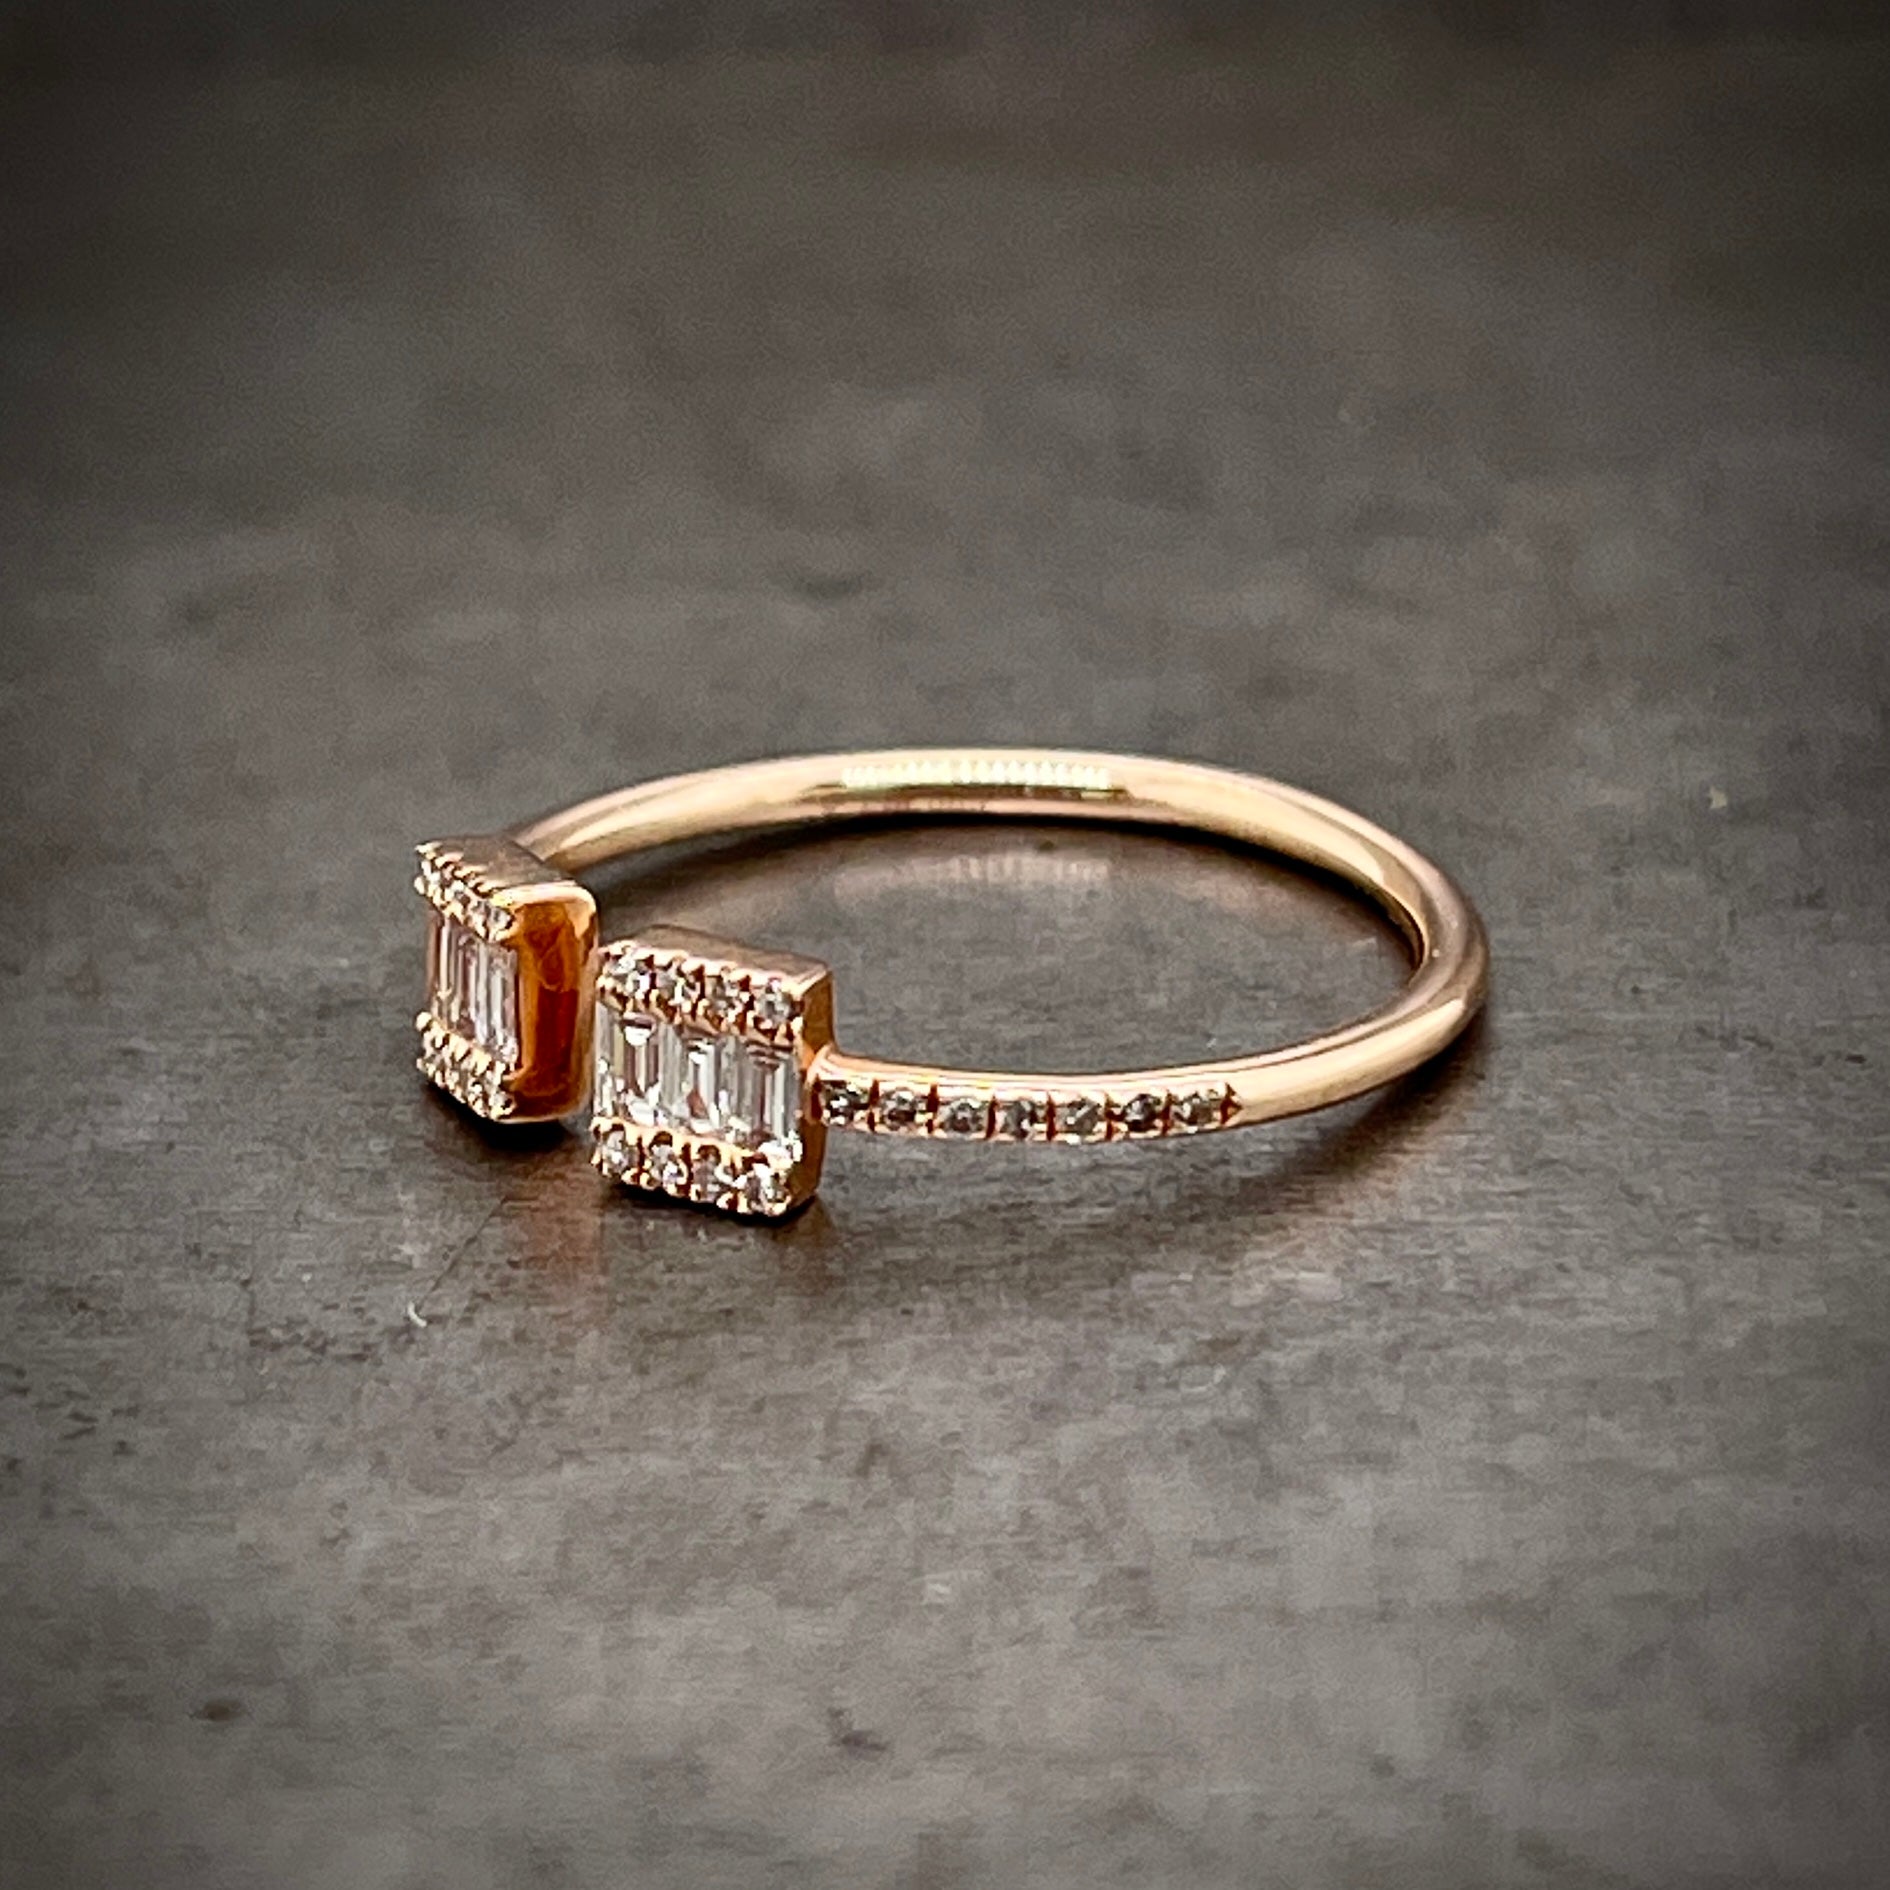 3/4 profile of rose gold negative space ring. Here you can see the diamonds only travel to the shoulders of the ring and do not extend towards the shank.